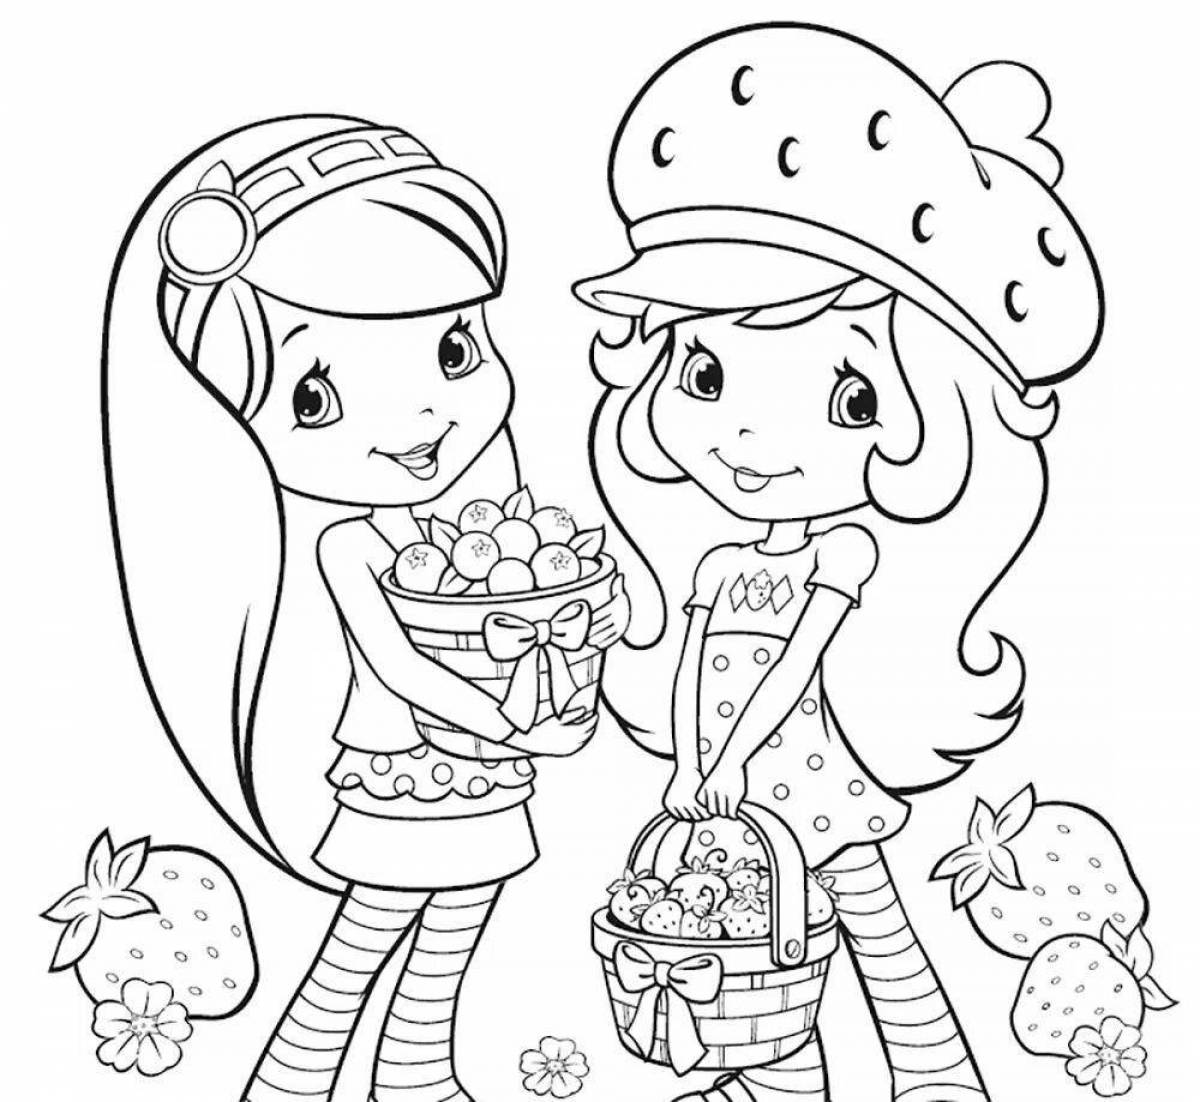 Charlotte's adorable strawberry coloring book for girls